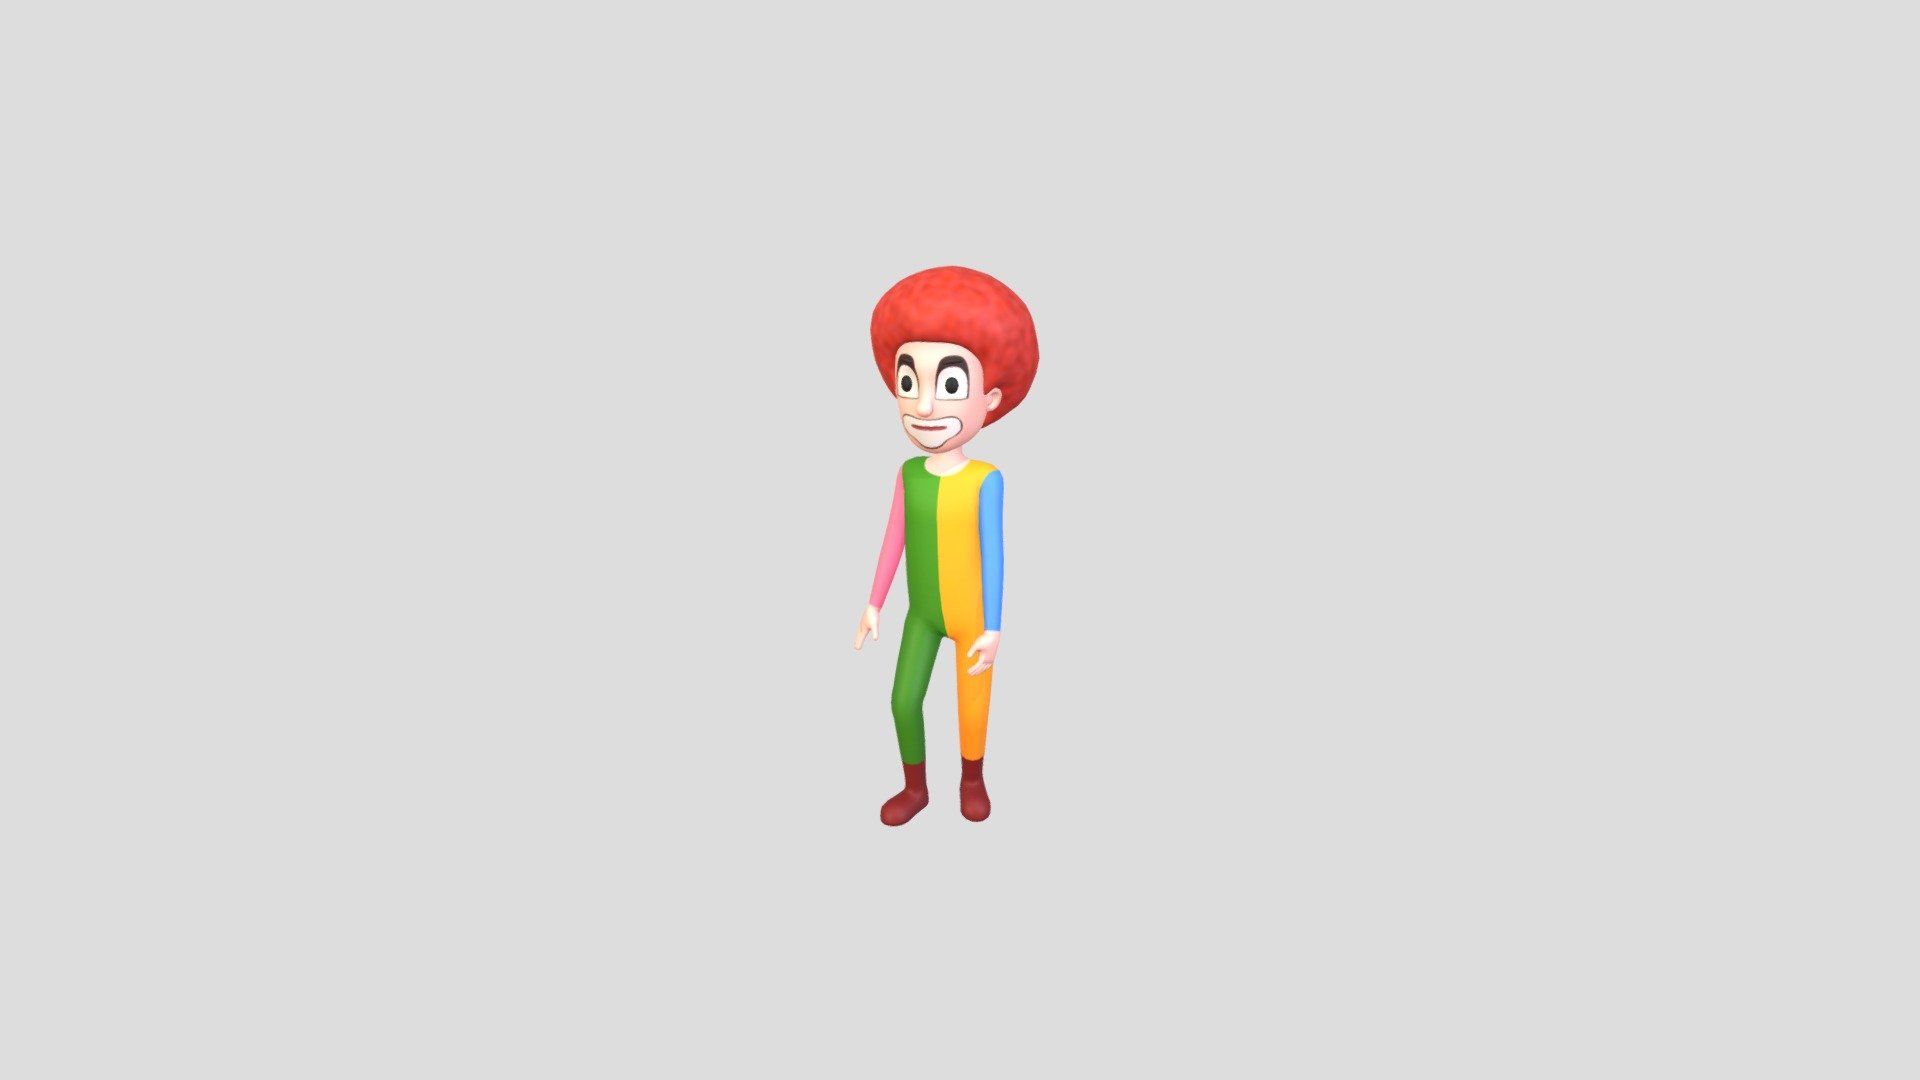 Rigged Clown Character 3d model.      
    


File Format      
 
- 3ds max 2021  
 
- FBX  
 
- OBJ  
    


Clean topology    

Rig with CAT in 3ds Max                          

Bone and Weight skin are in fbx file                 

No Facial Rig               

No Animation               

Non-overlapping unwrapped UVs        
 


PNG texture               

2048x2048                


- Base Color                        

- Roughness                         



6,580 polygons                          

6,430 vertexs                          
 - Character173 Rigged Clown - Buy Royalty Free 3D model by BaluCG 3d model